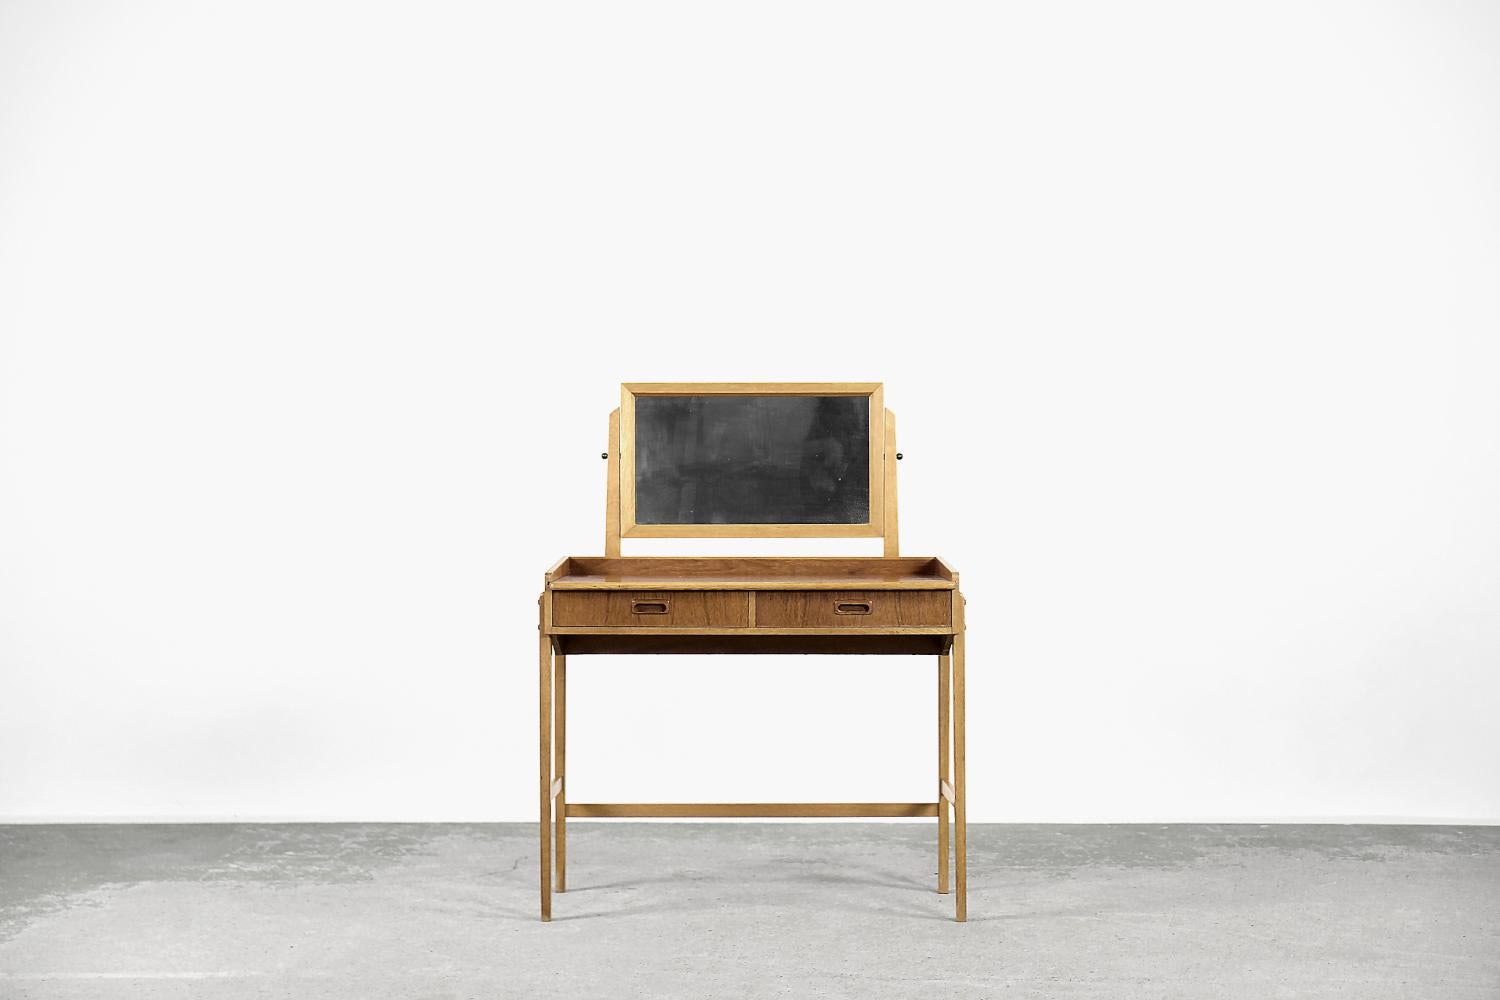 This modernist dressing table with a mirror was made in Sweden during the 1960s. It is made of teak wood in a warm shade of brown. It has two spacious drawers and a pull-out top with a partition. The mirror can be adjusted at any angle.

This